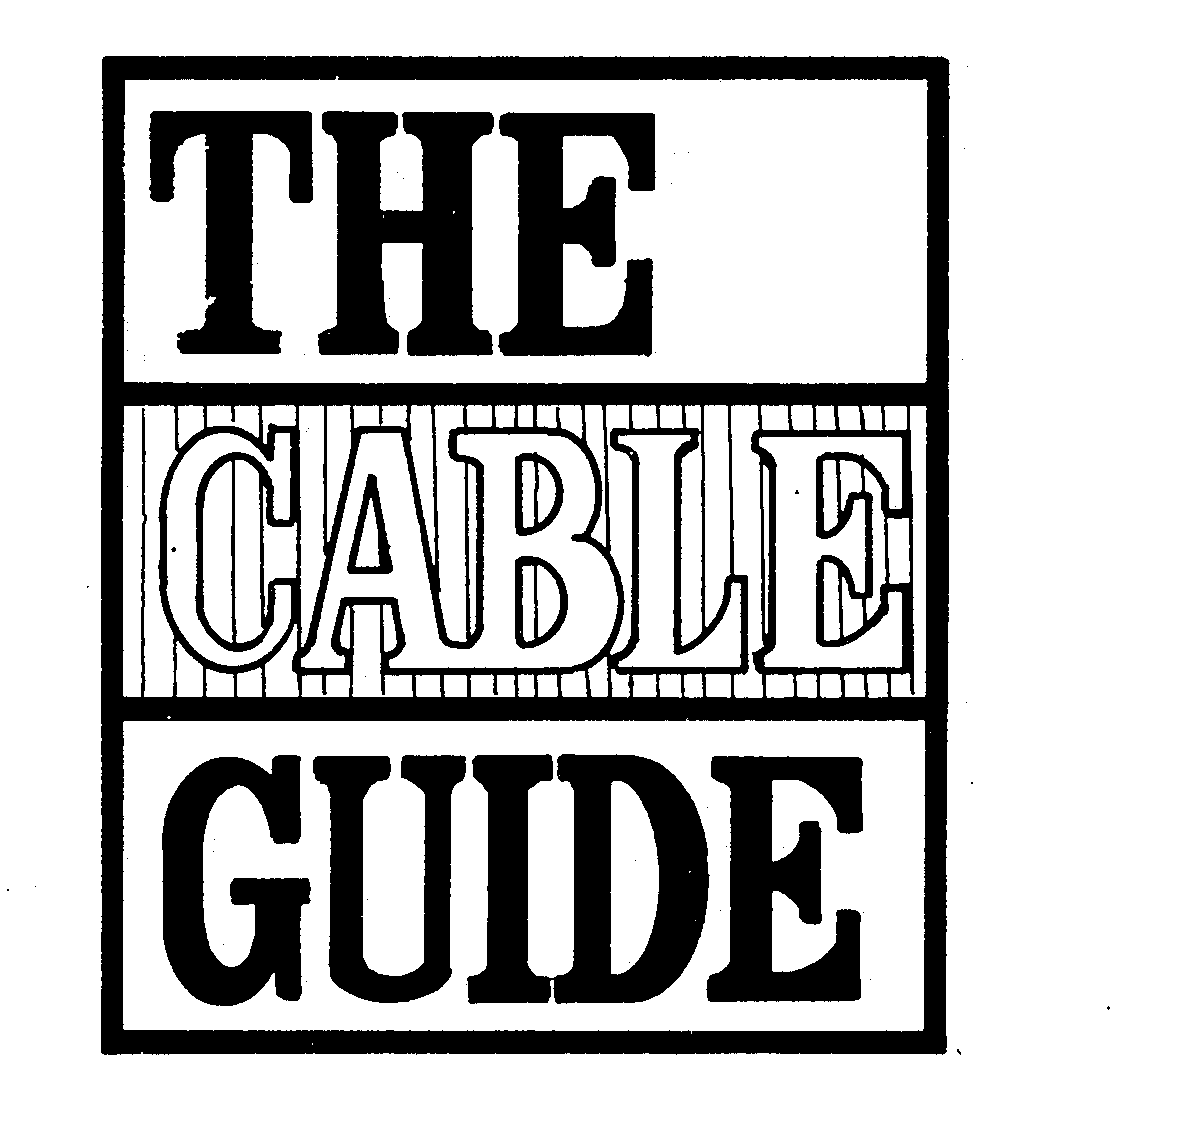 THE CABLE GUIDE